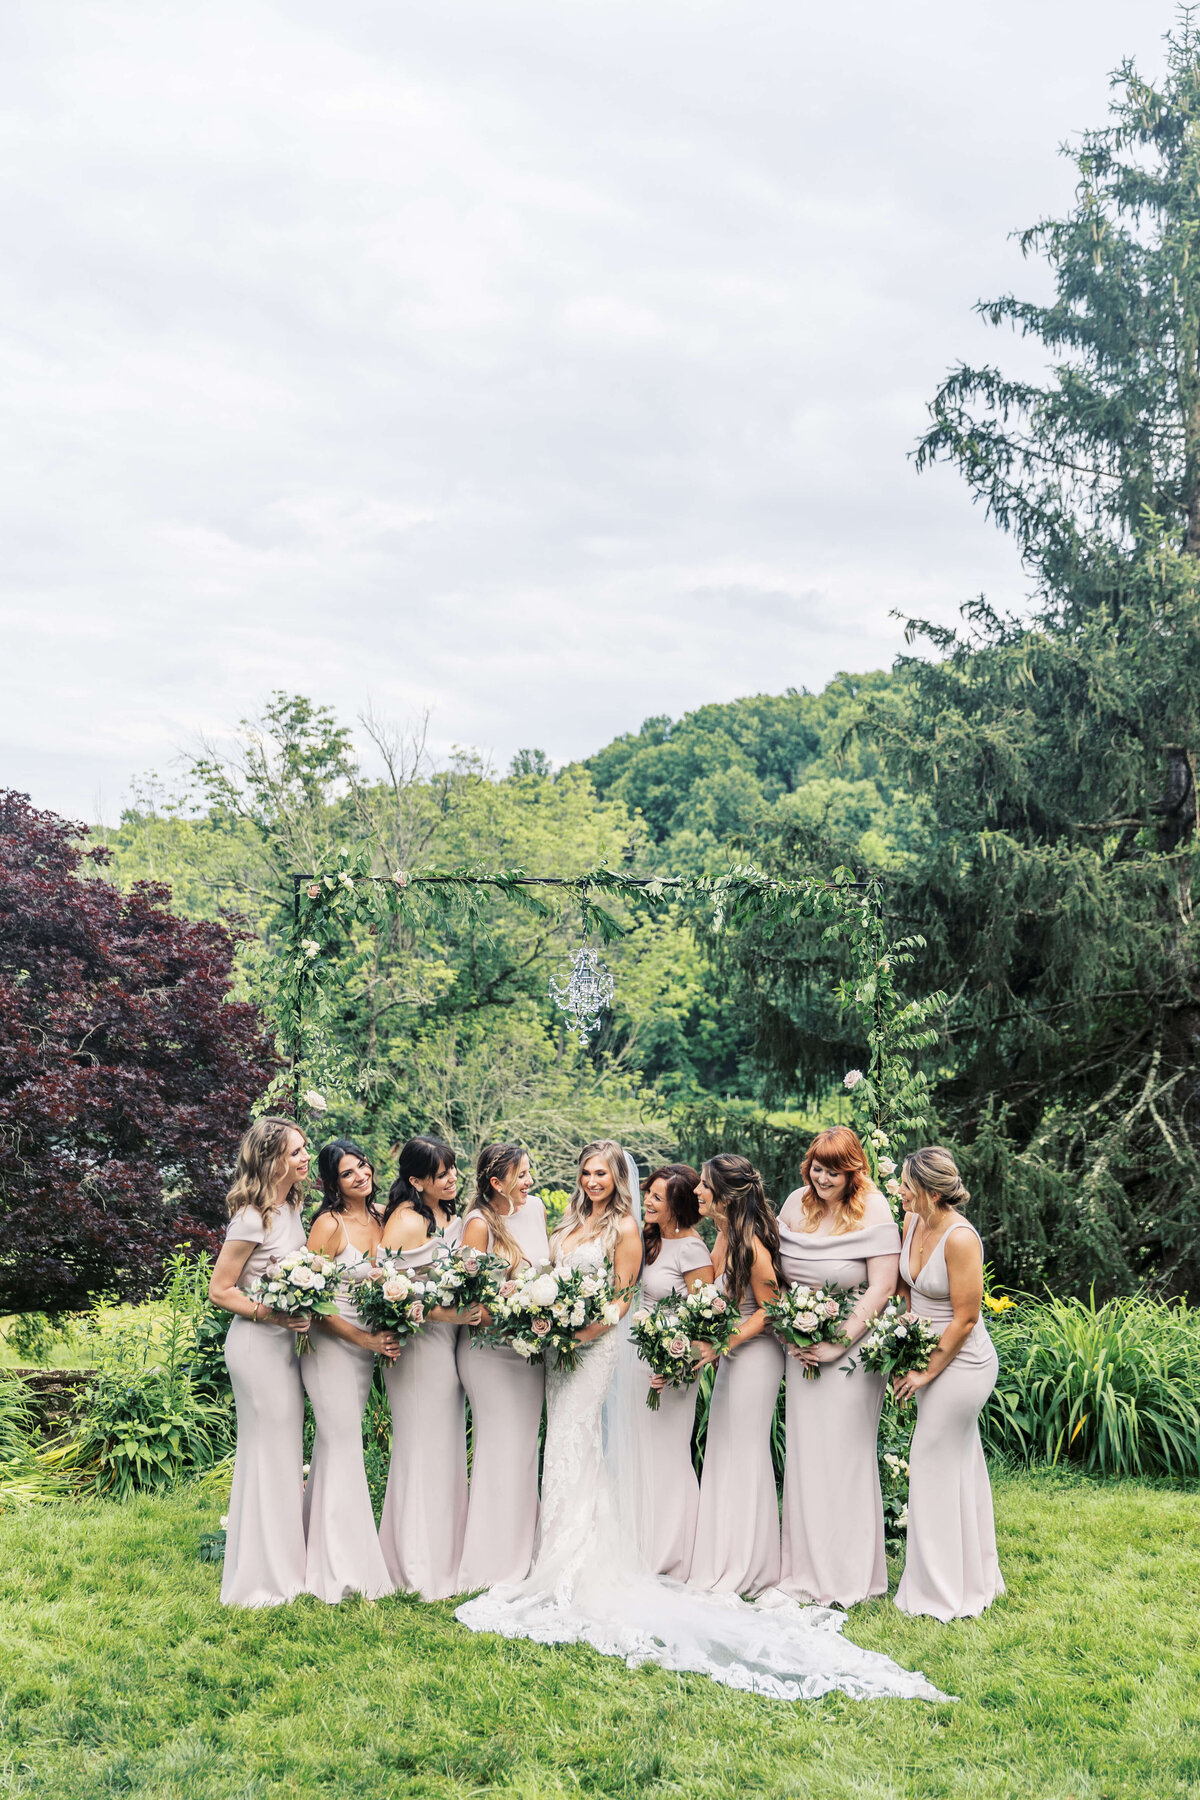 Bride laughs with her bridesmaids on her wedding day.